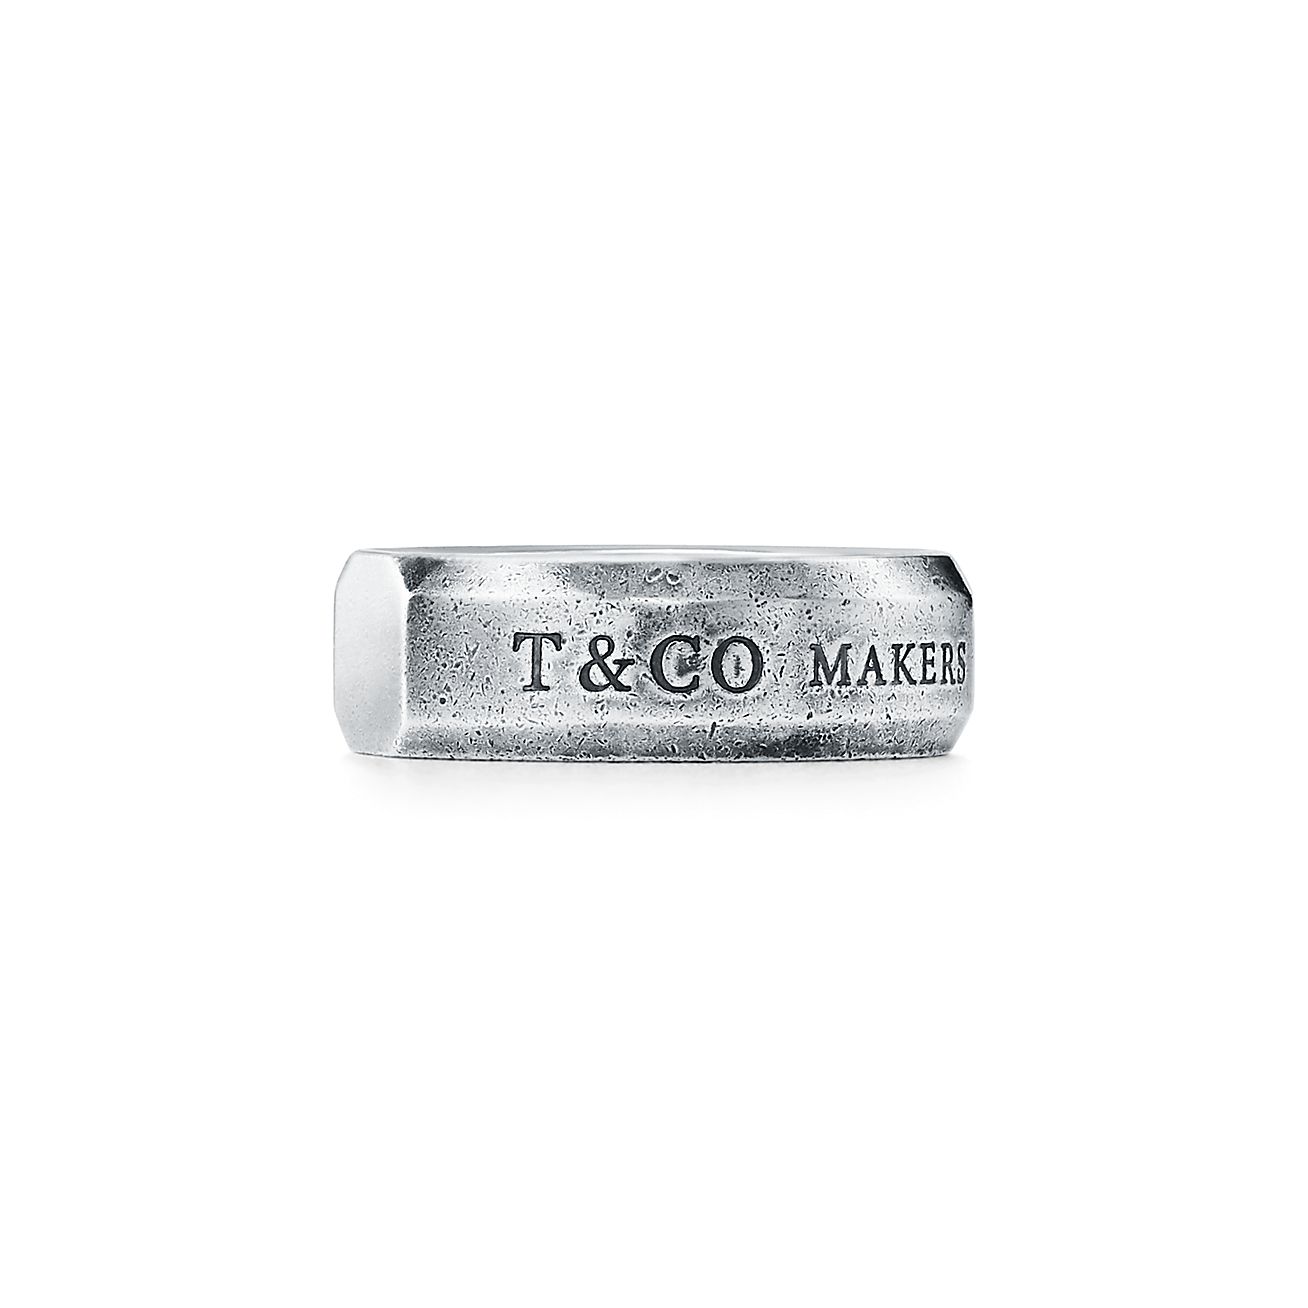 Tiffany 1837® Makers Tumbled Medium Slice Ring in Sterling Silver